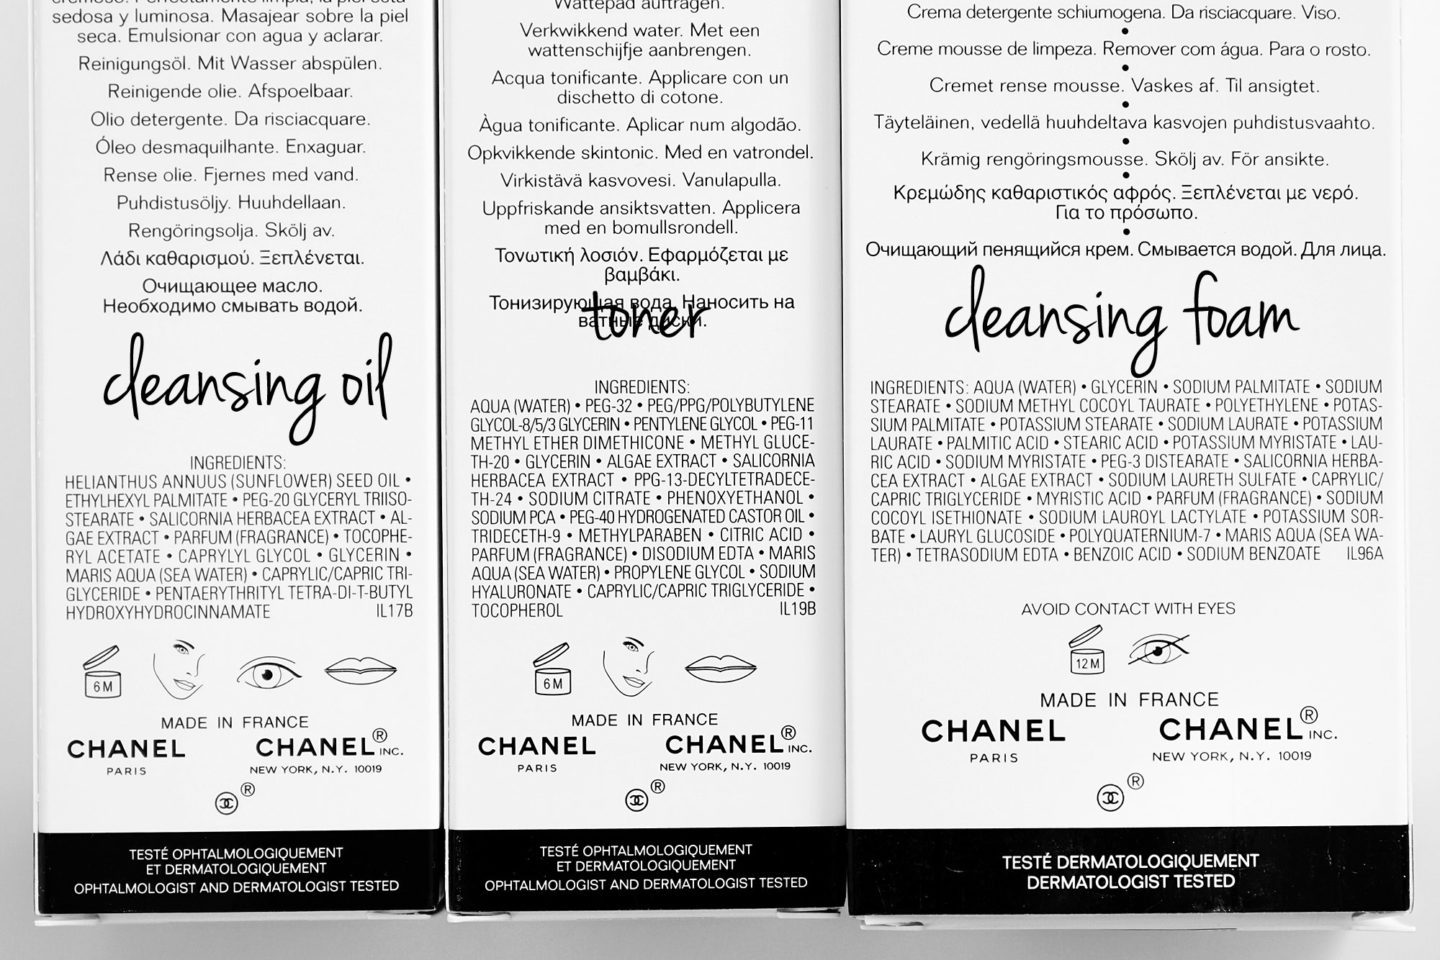 Chanel Cleansing Collection Ingredients